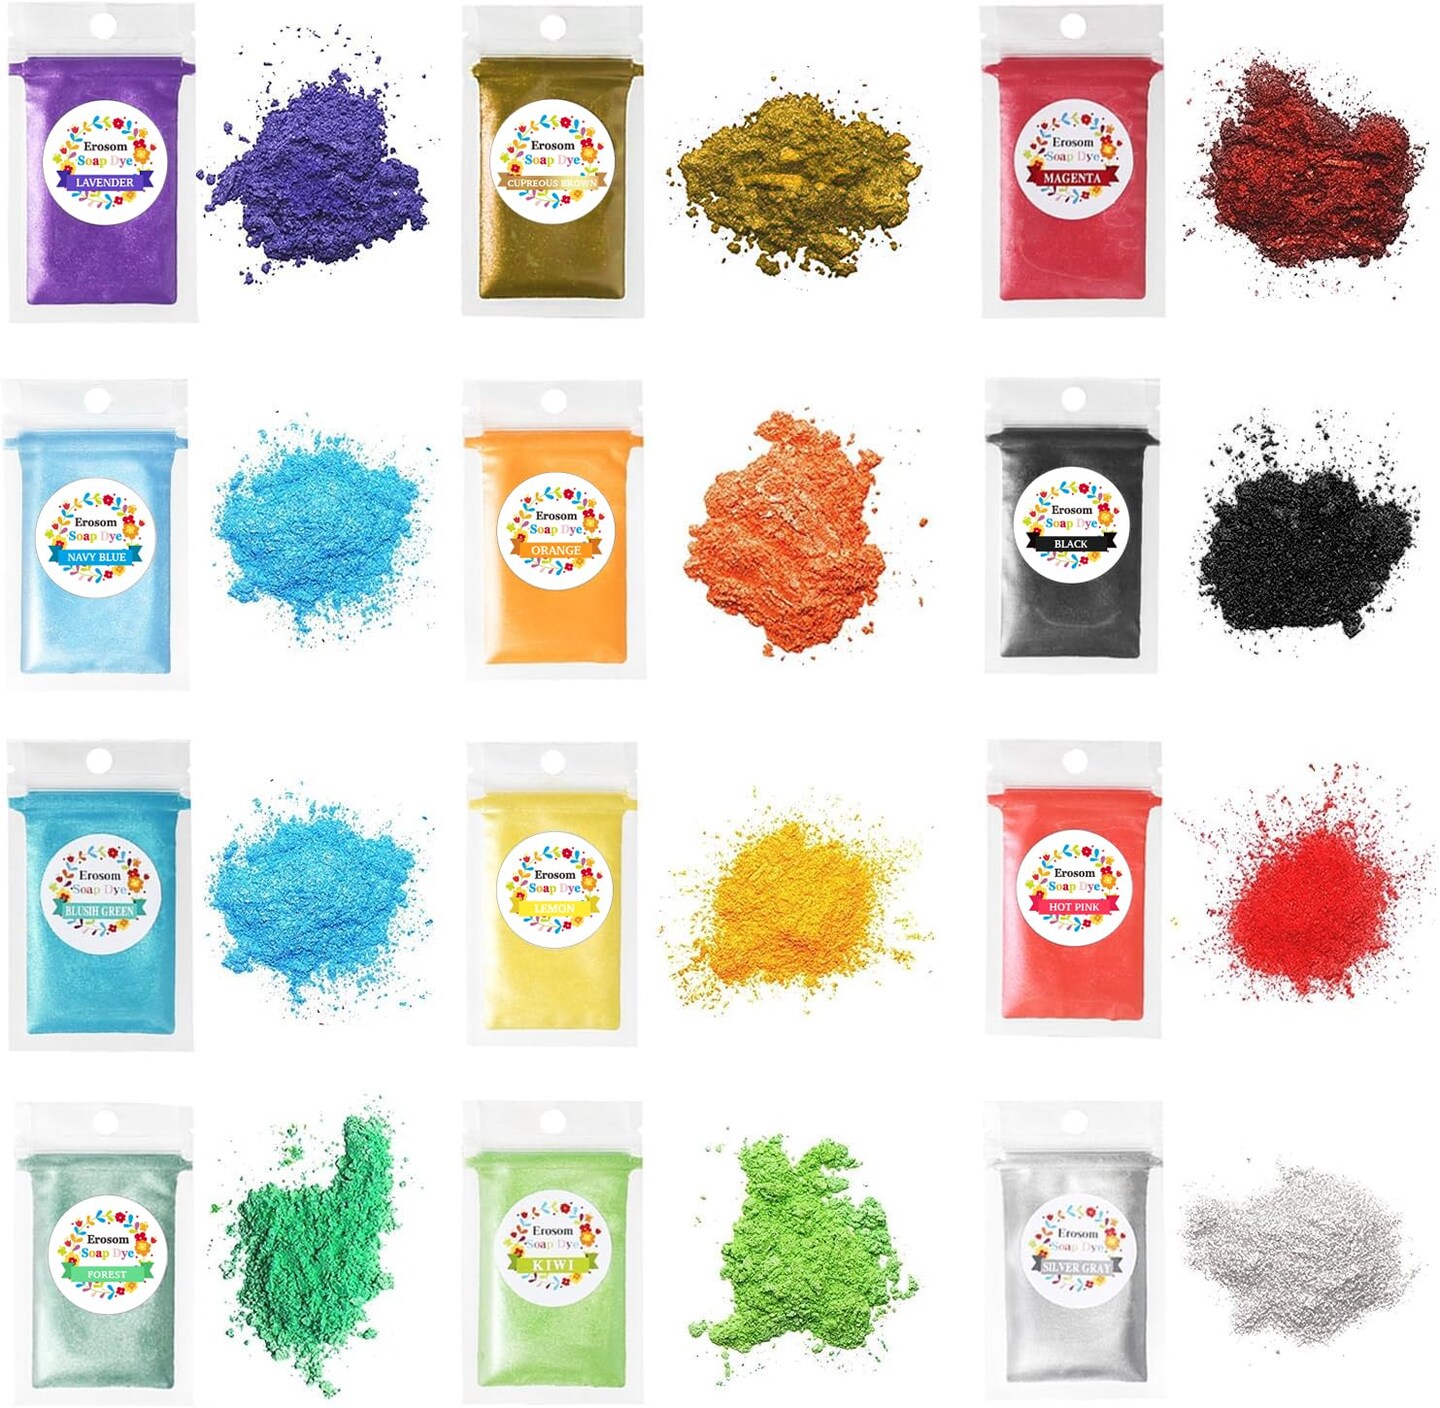 12 Colors Mica Powder Pigments Soap Dye for Soap Coloring - Soap Making Colorants Set - 0.18oz 12 Bags - Skin Safe for DIY Soaps, Bath Bombs, Candle Making, Nail Polishes, Resin Makeup Dye.